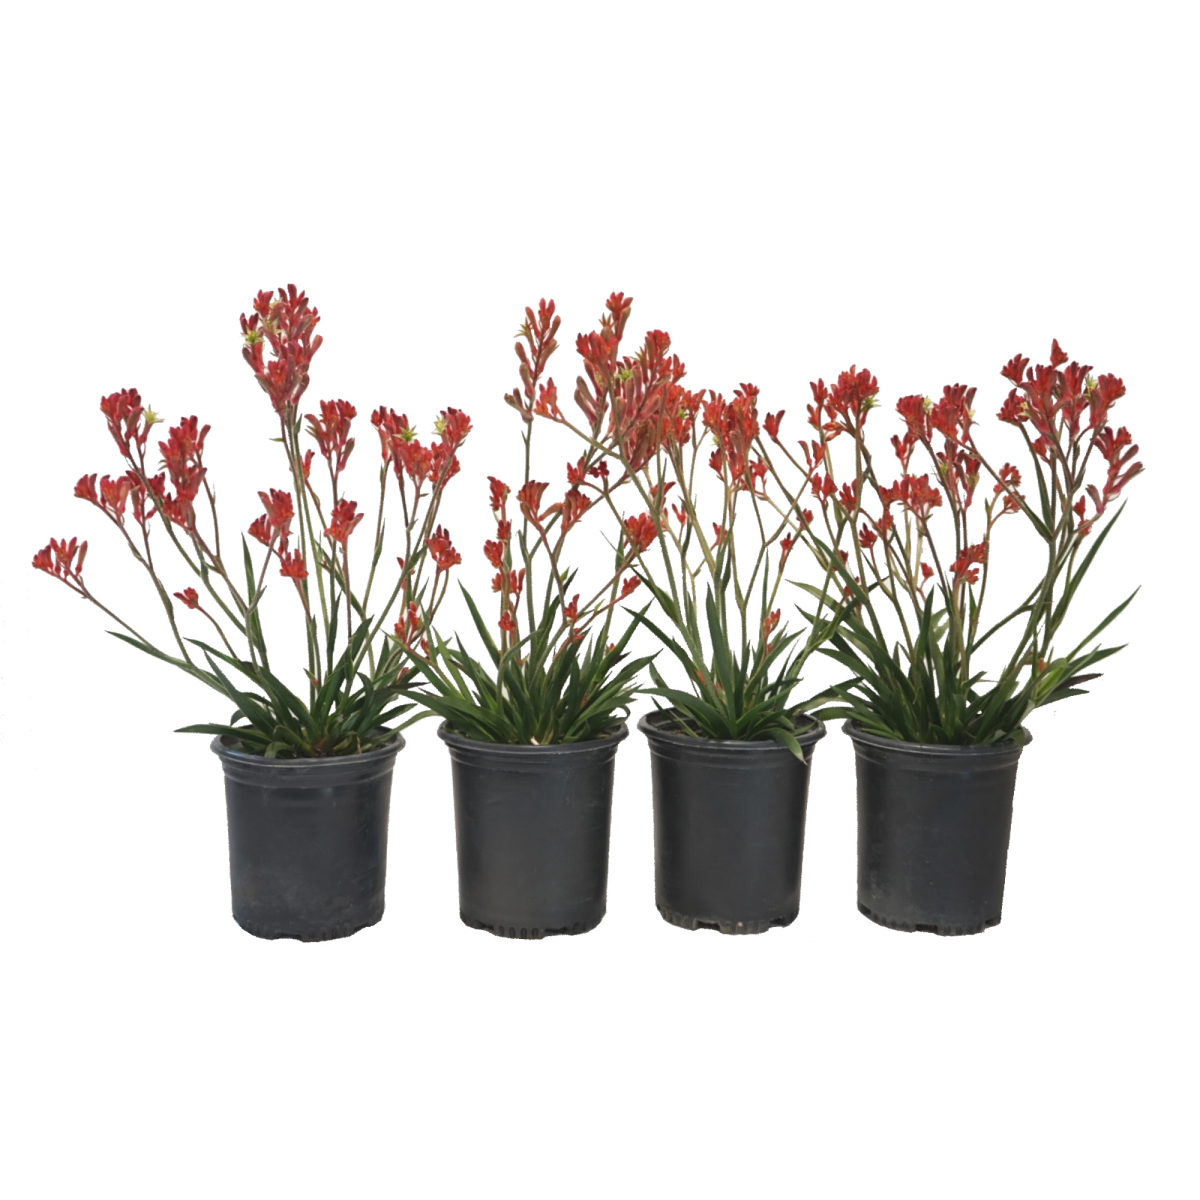 Red Kangaroo Paws with bright red flowers in black nursery pots.